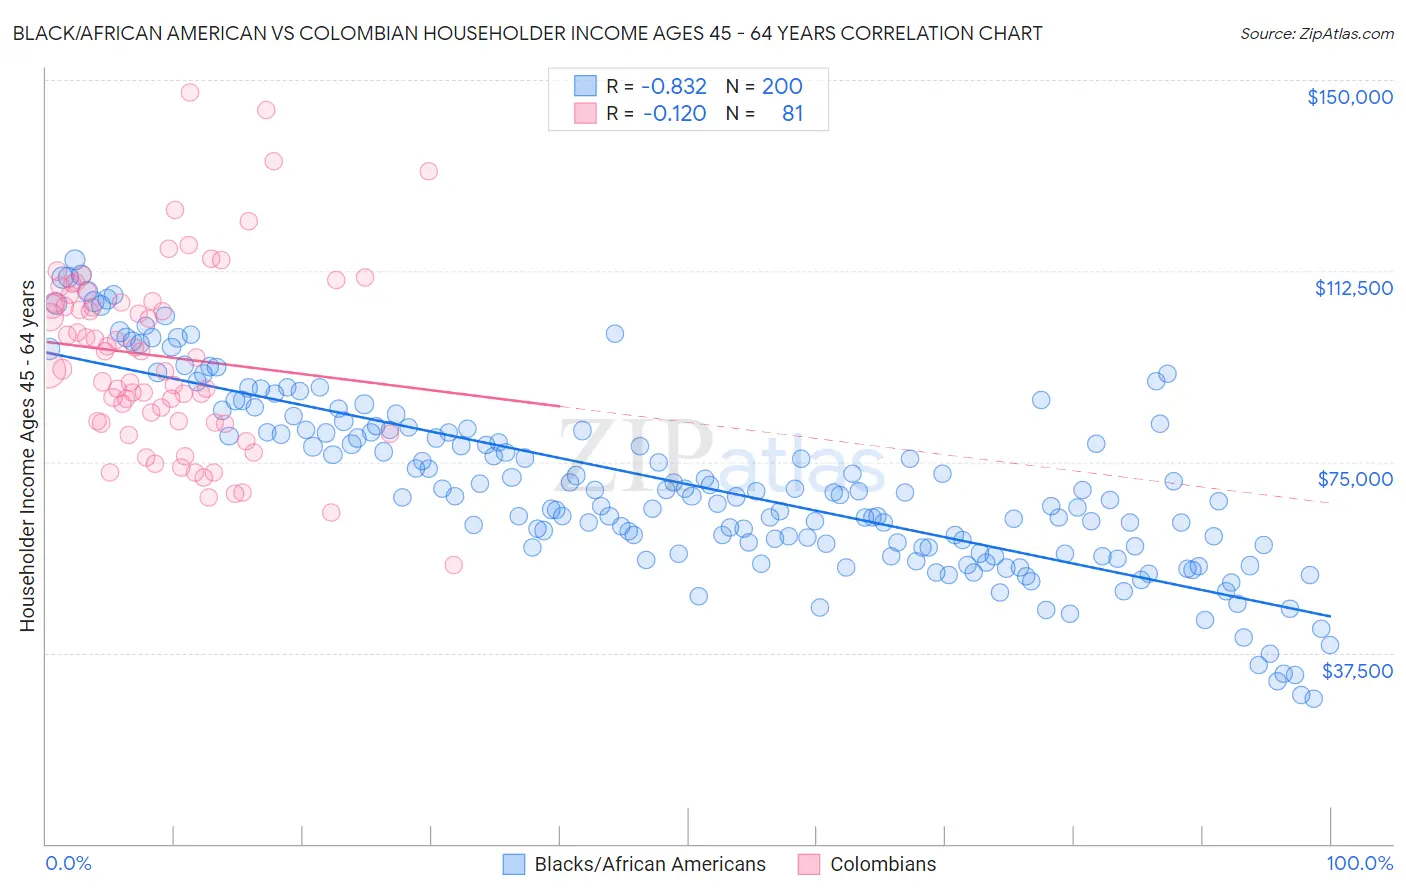 Black/African American vs Colombian Householder Income Ages 45 - 64 years